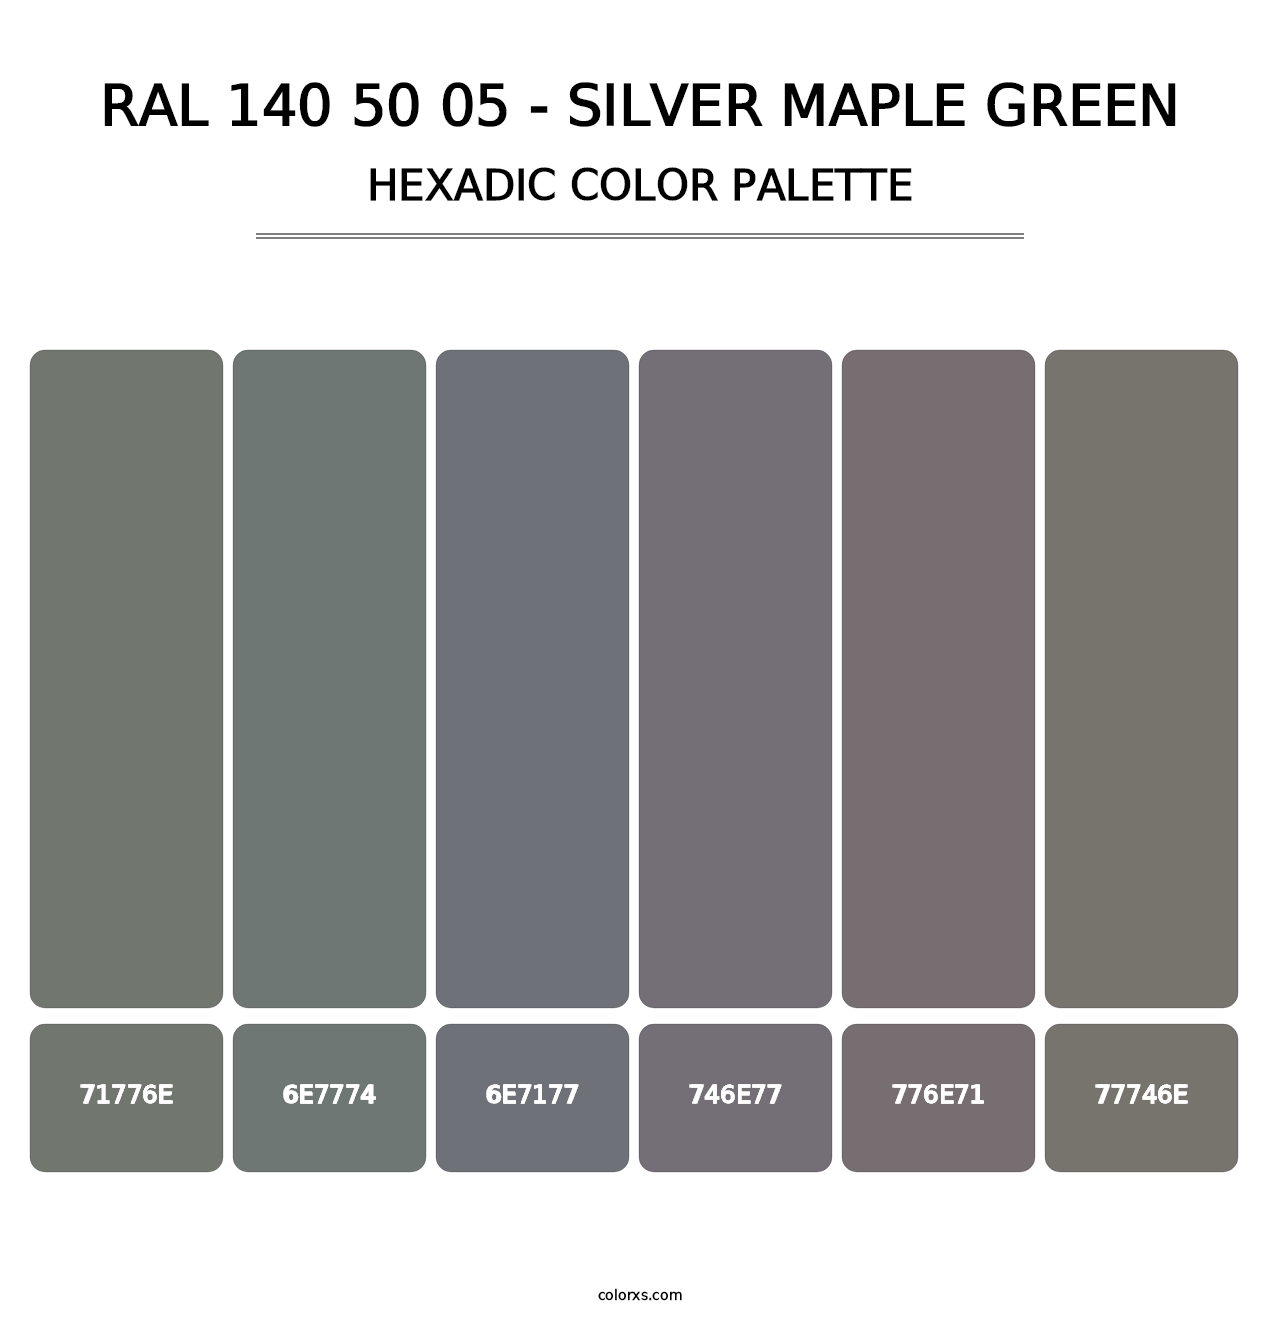 RAL 140 50 05 - Silver Maple Green - Hexadic Color Palette